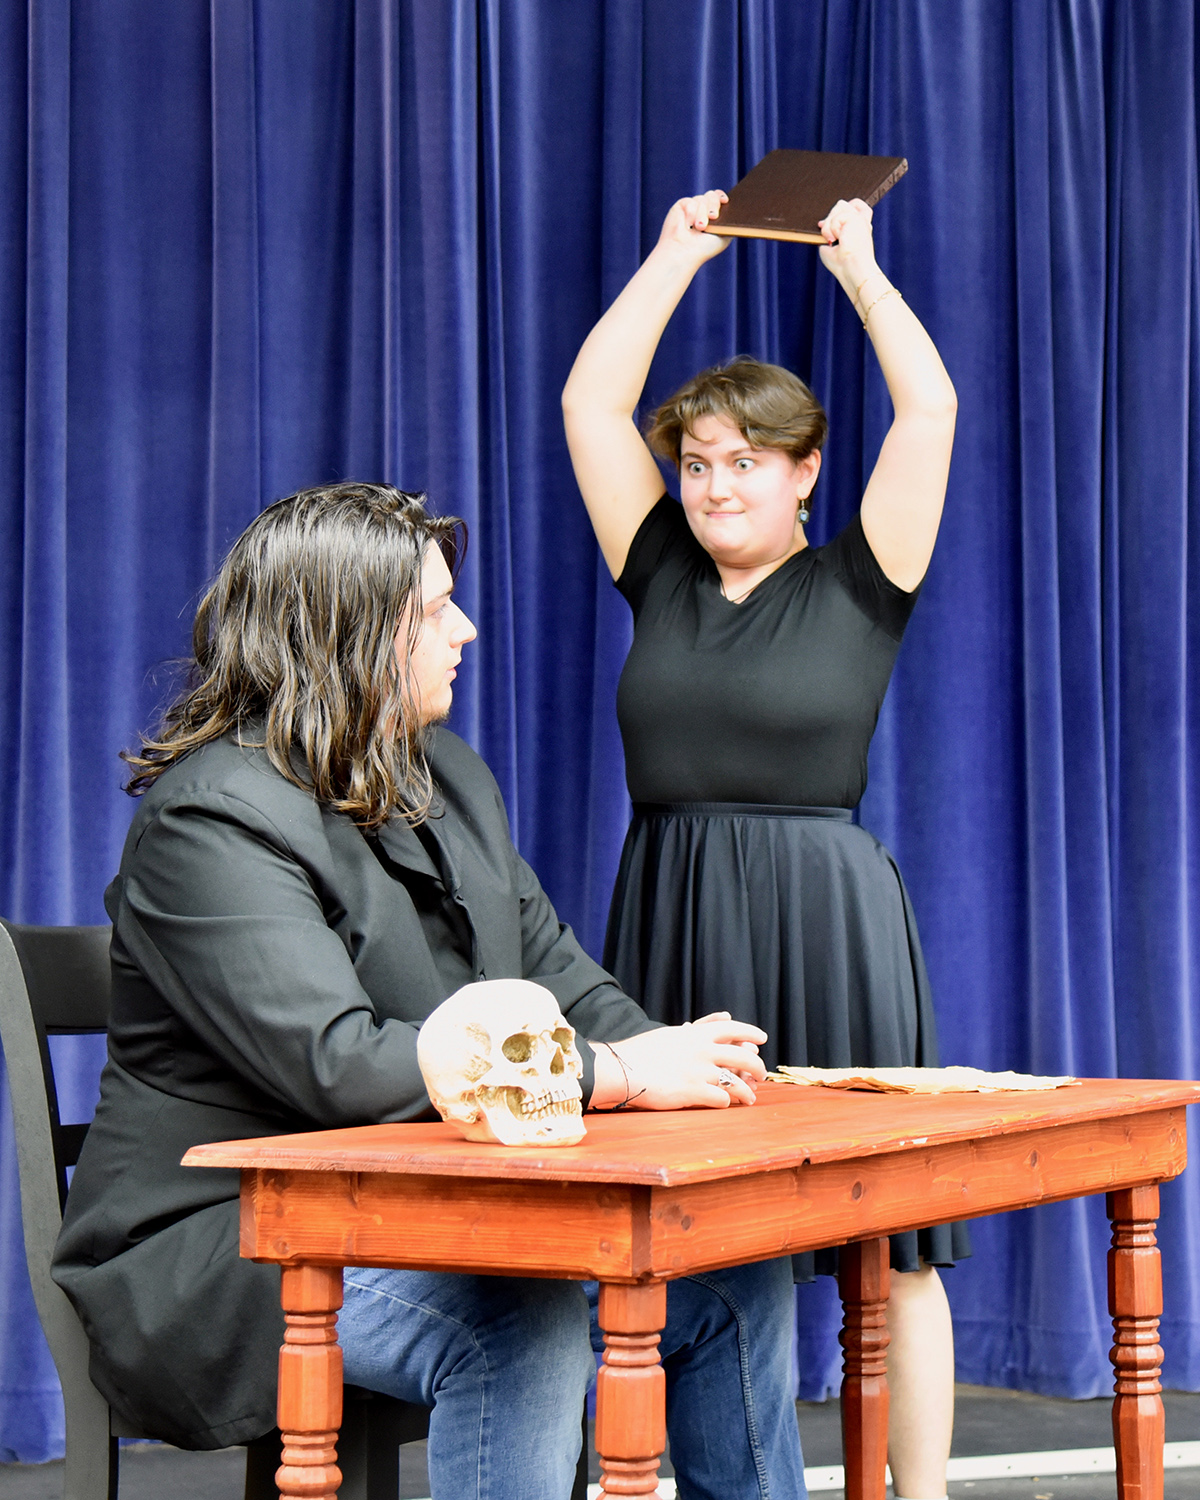 A person holds a book above their head while looking at another person sitting at a table with a skull on it.